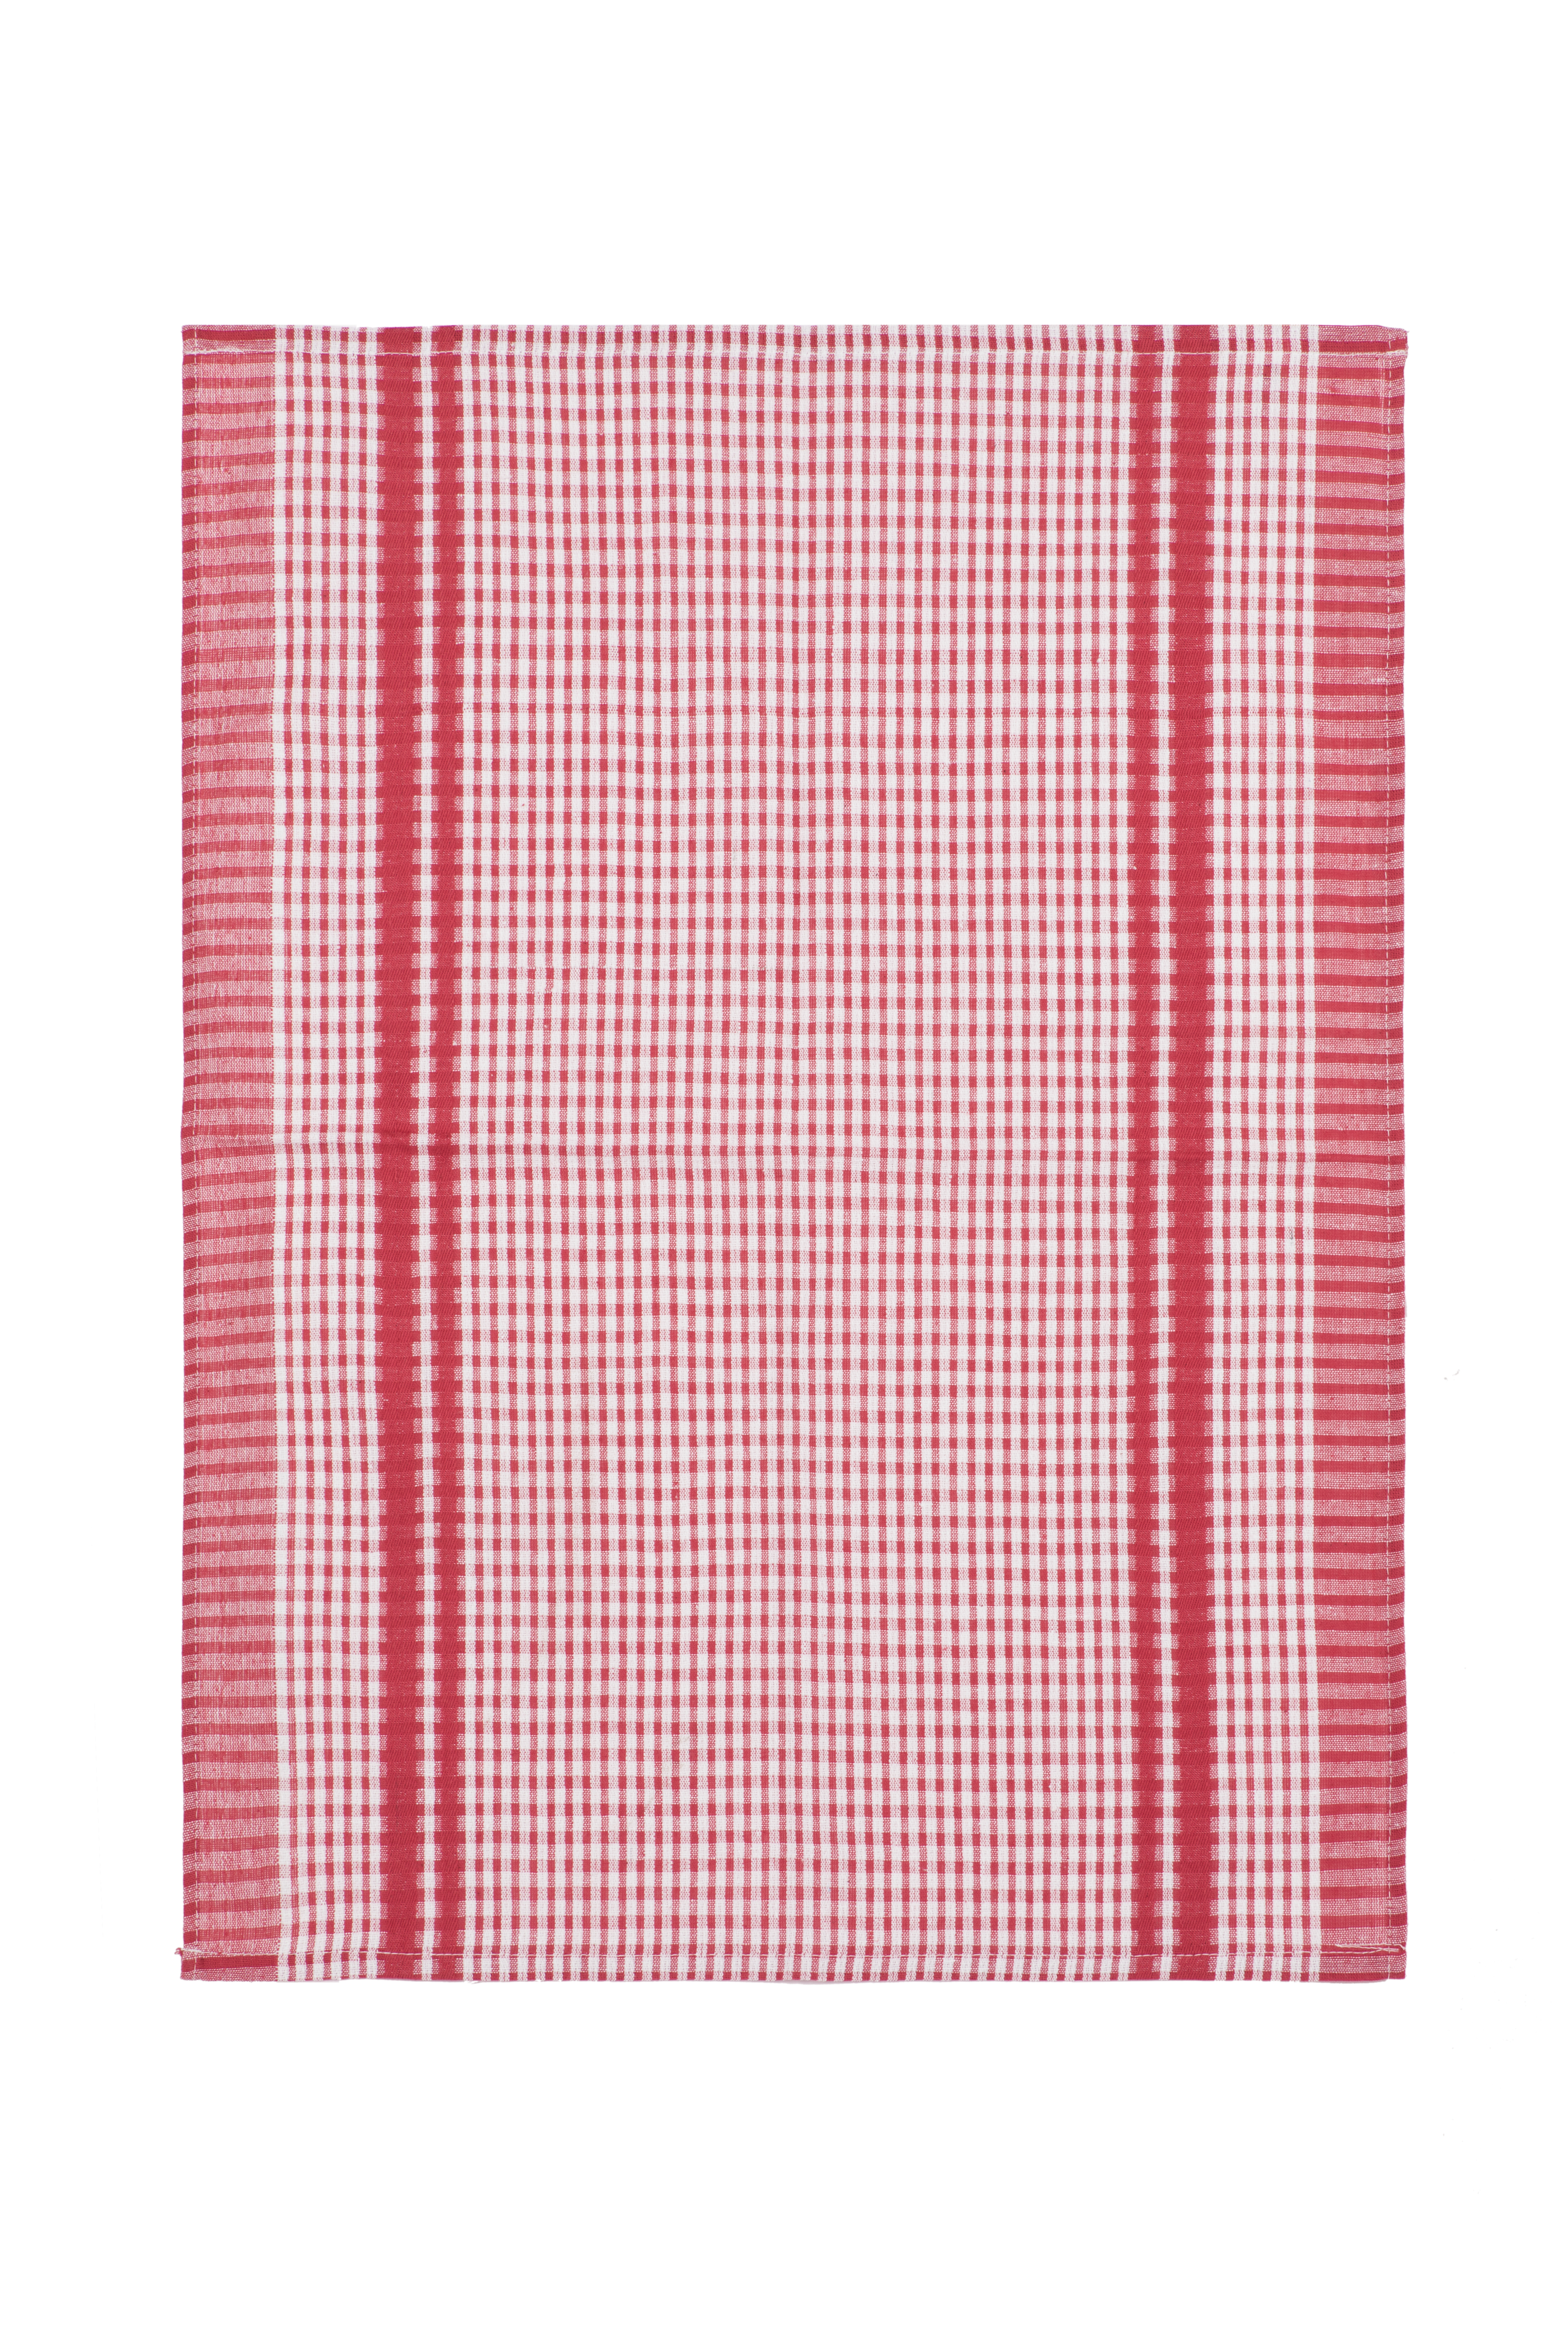 Torchon WAFFLE 50x70 Red  - SET/6